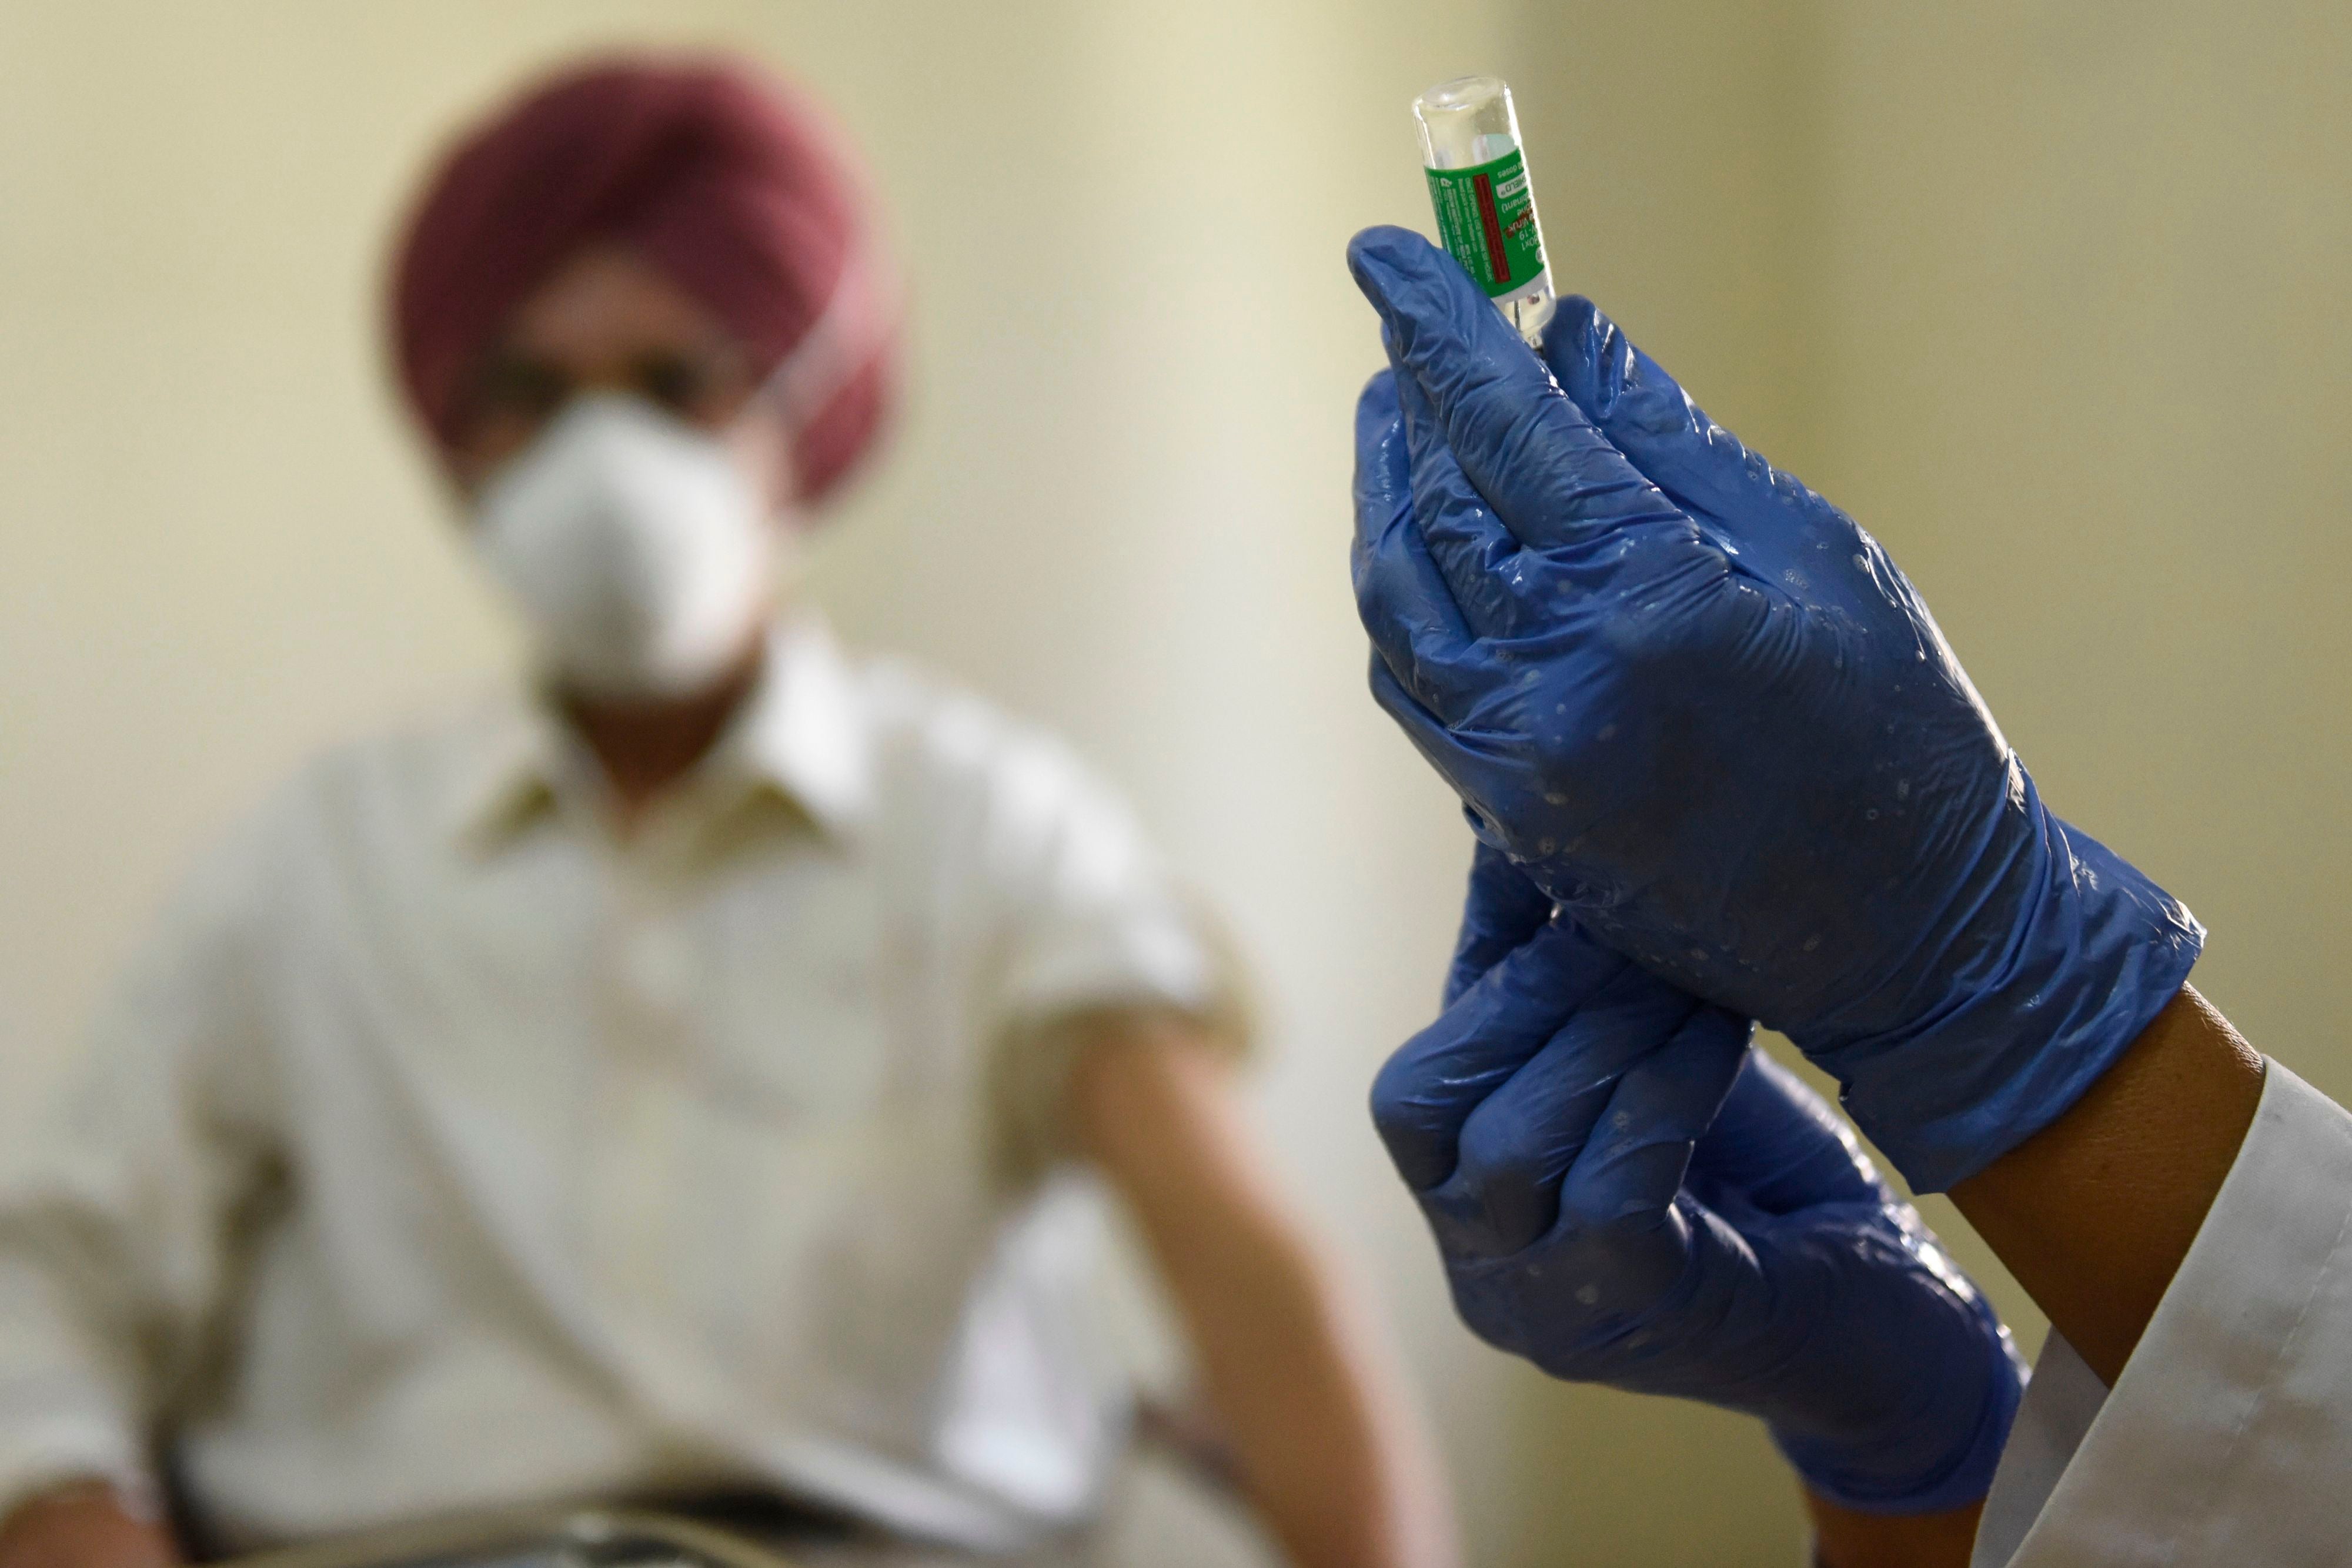 A medical worker prepares to inoculate a man with a Covid-19 vaccine at a hospital in Amritsar on 1 March, 2021